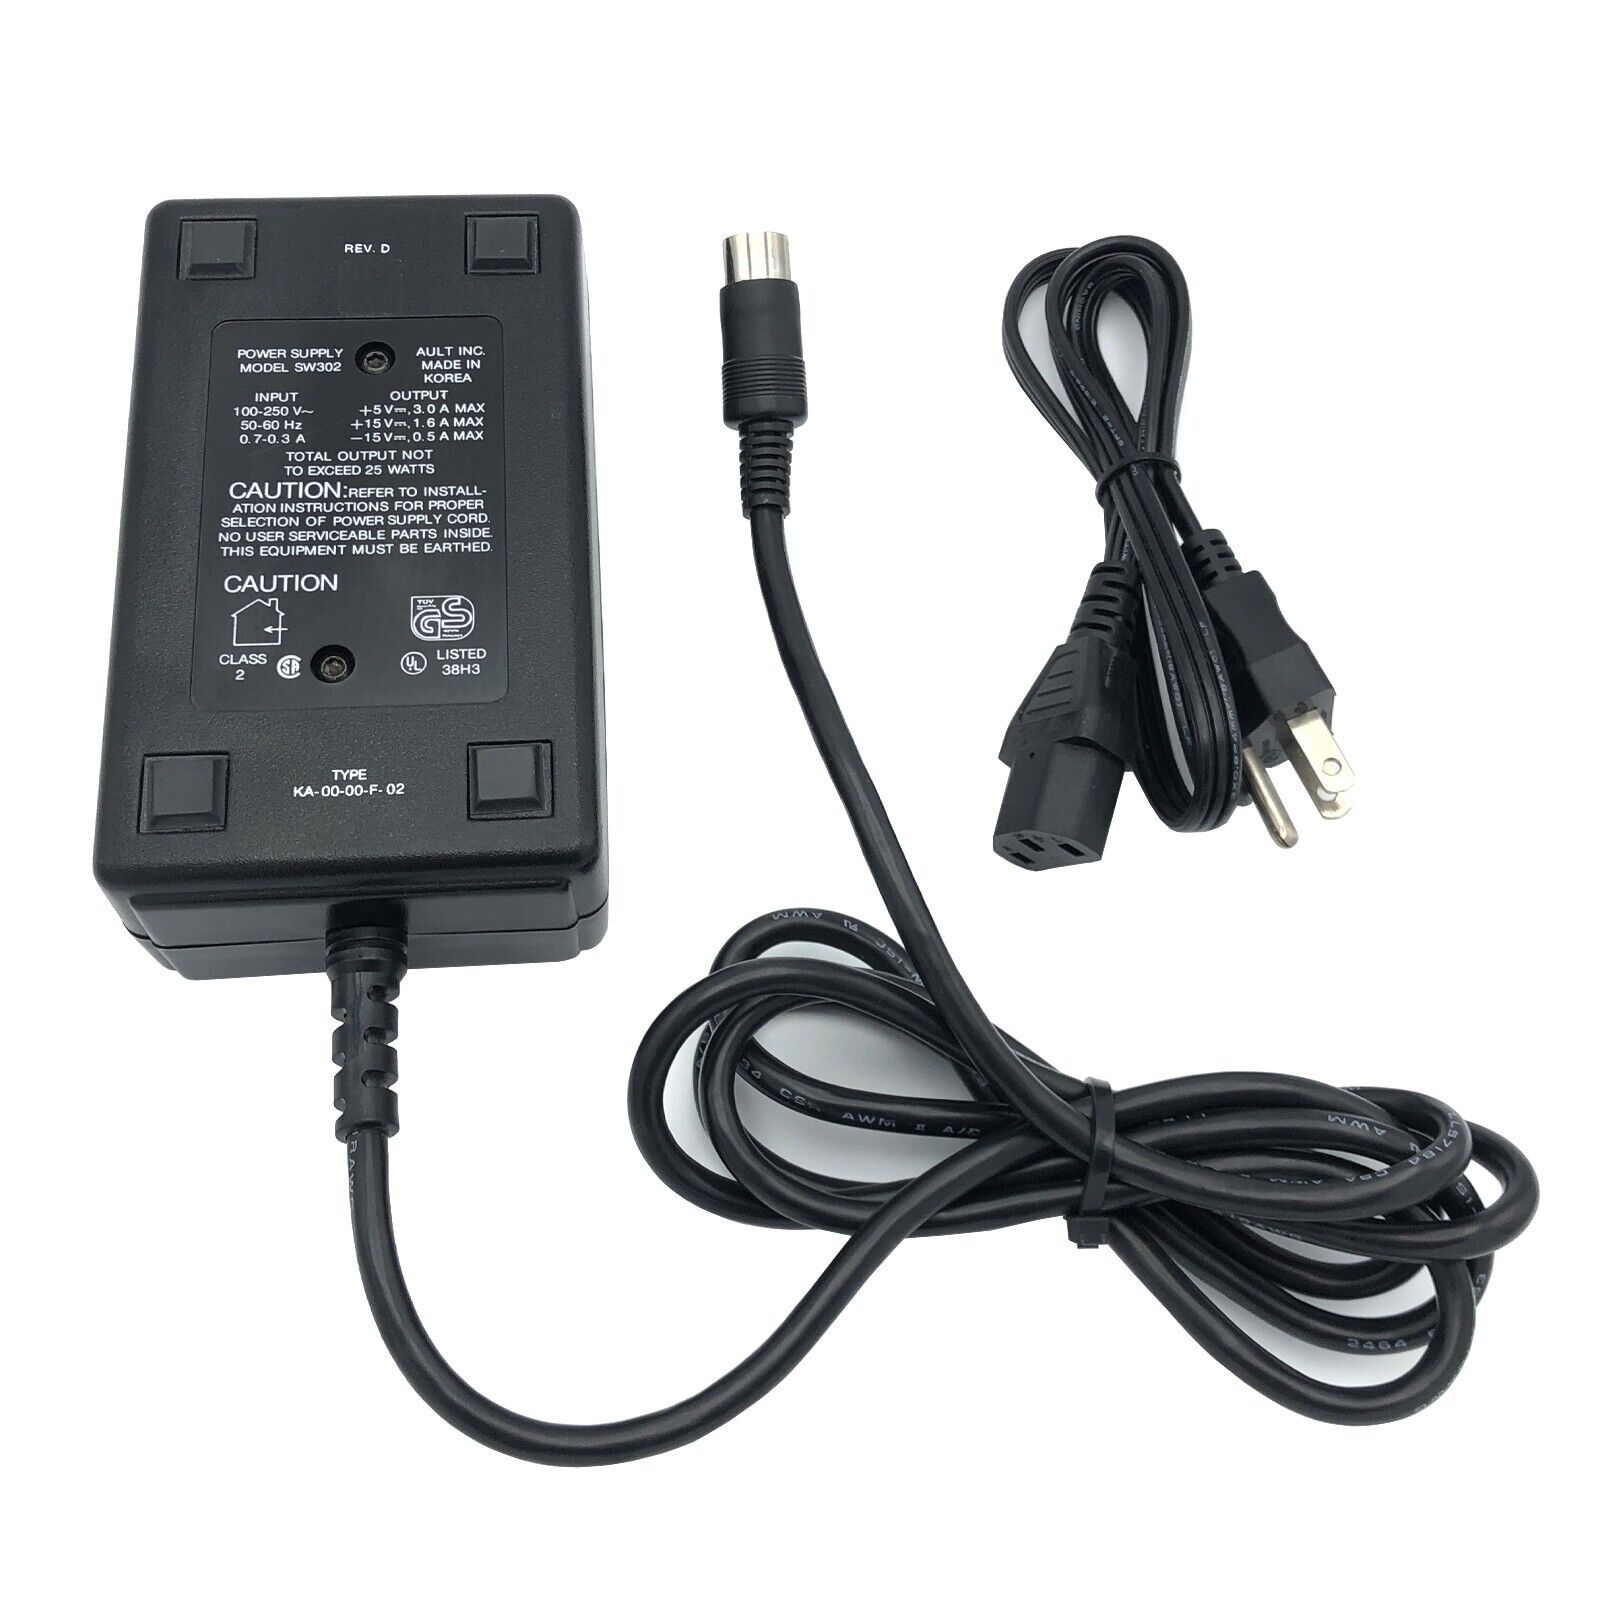 *Brand NEW*Genuine Ault SW302 25W AC/DC Adapter 5-Pin Power Supply